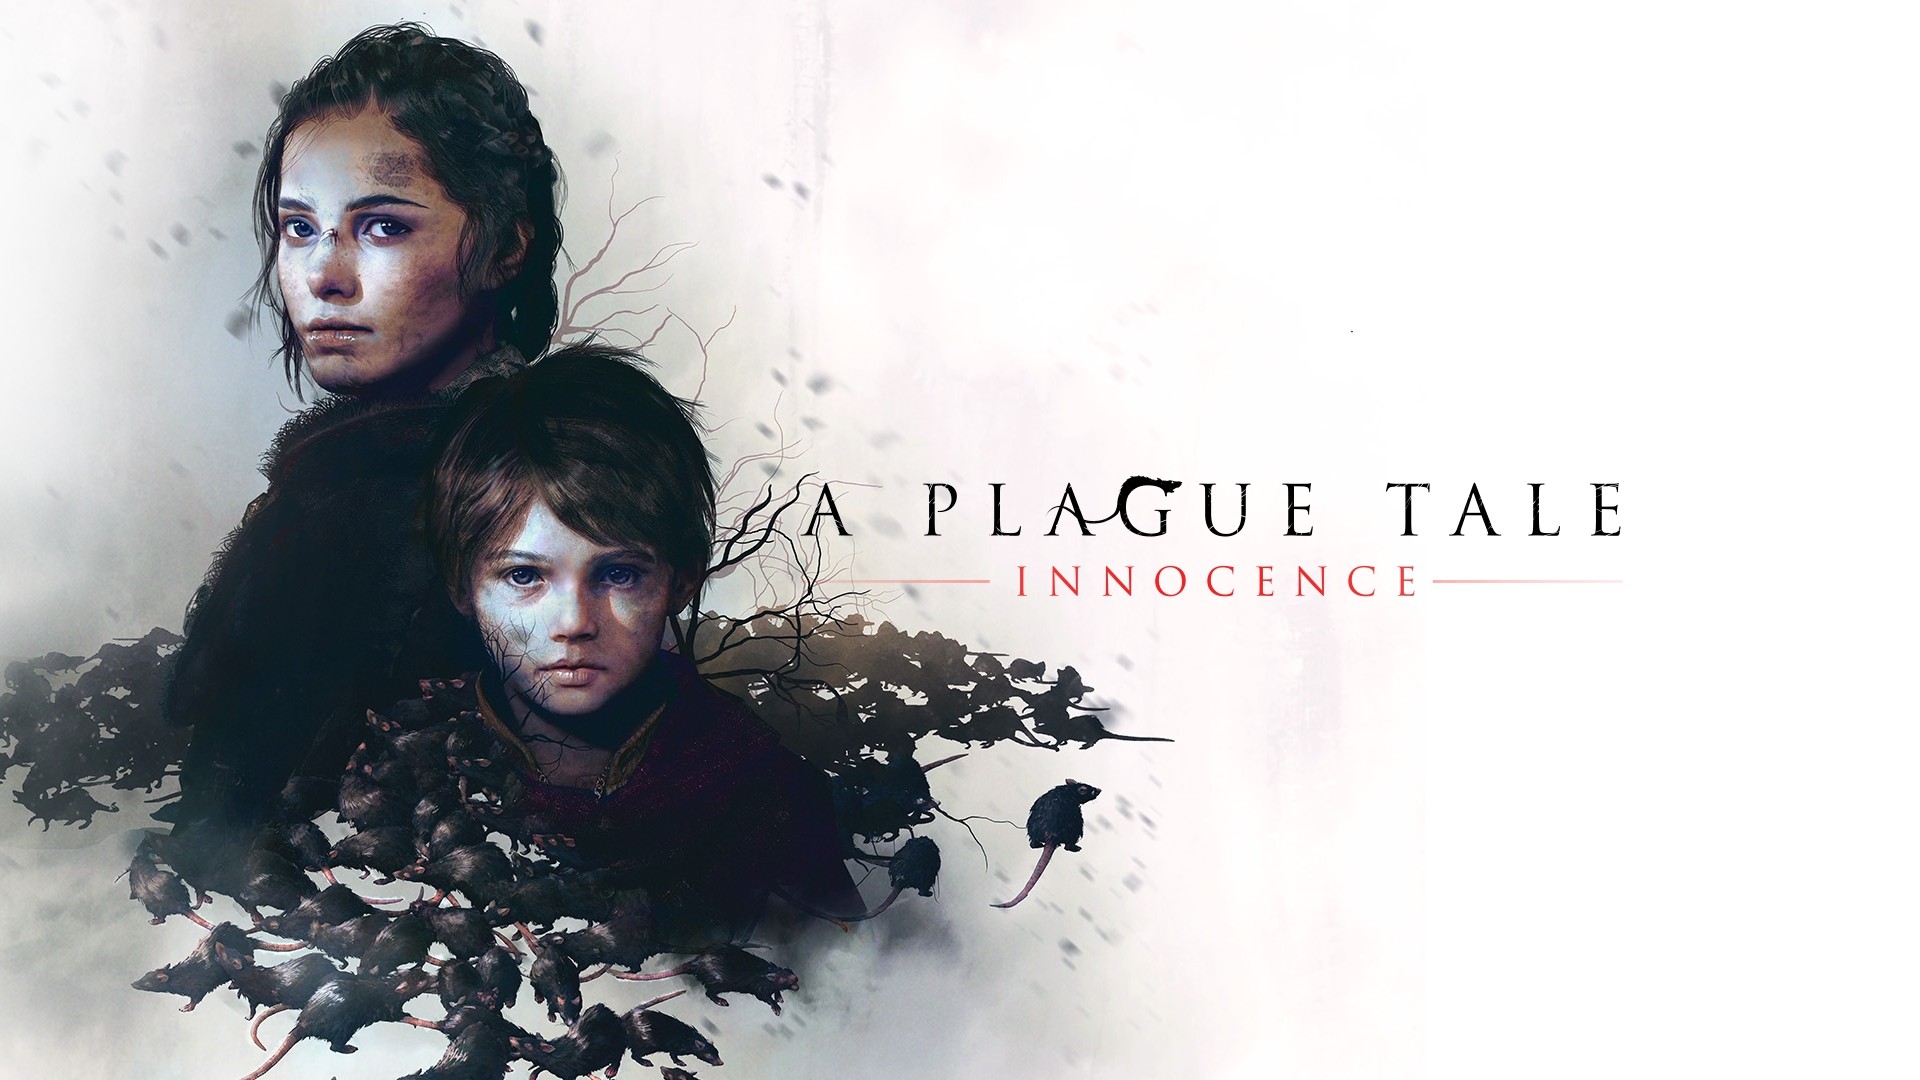 MOTHER IS STILL ALIVE - A PLAGUE TALE INNOCENCE Walkthrough Gameplay Part  23, Nintendo Switch, Asobo Studio, Xbox One, PlayStation 4, A Plague Tale:  Innocence